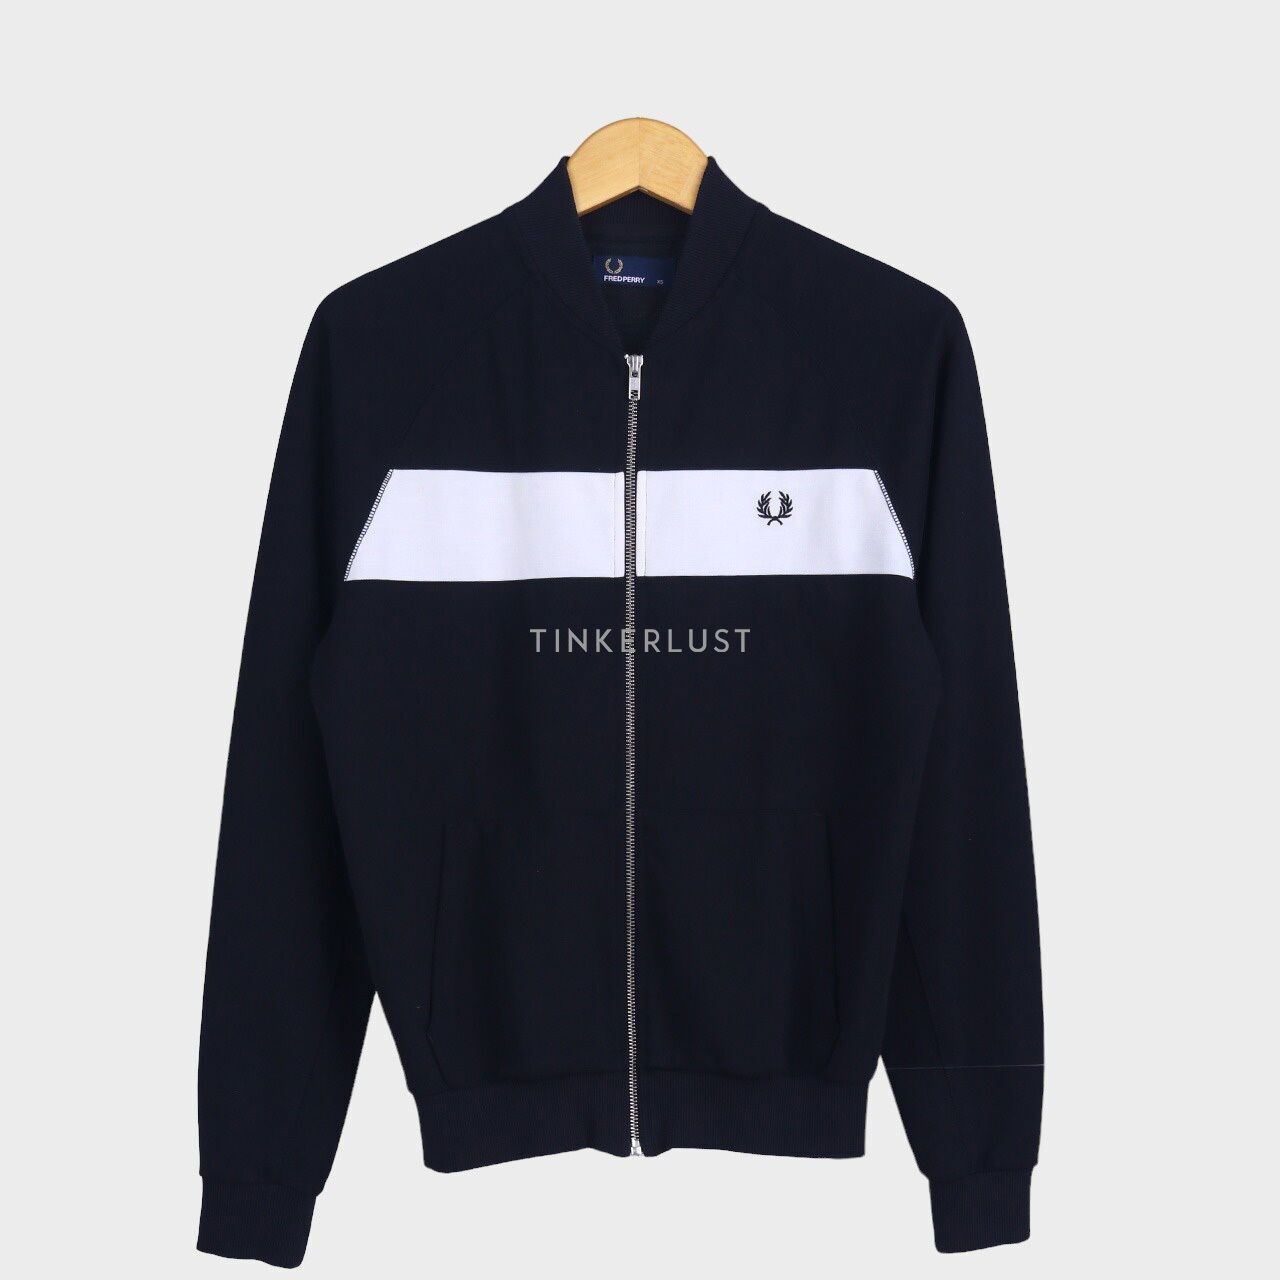 Fred Perry Black Jaket